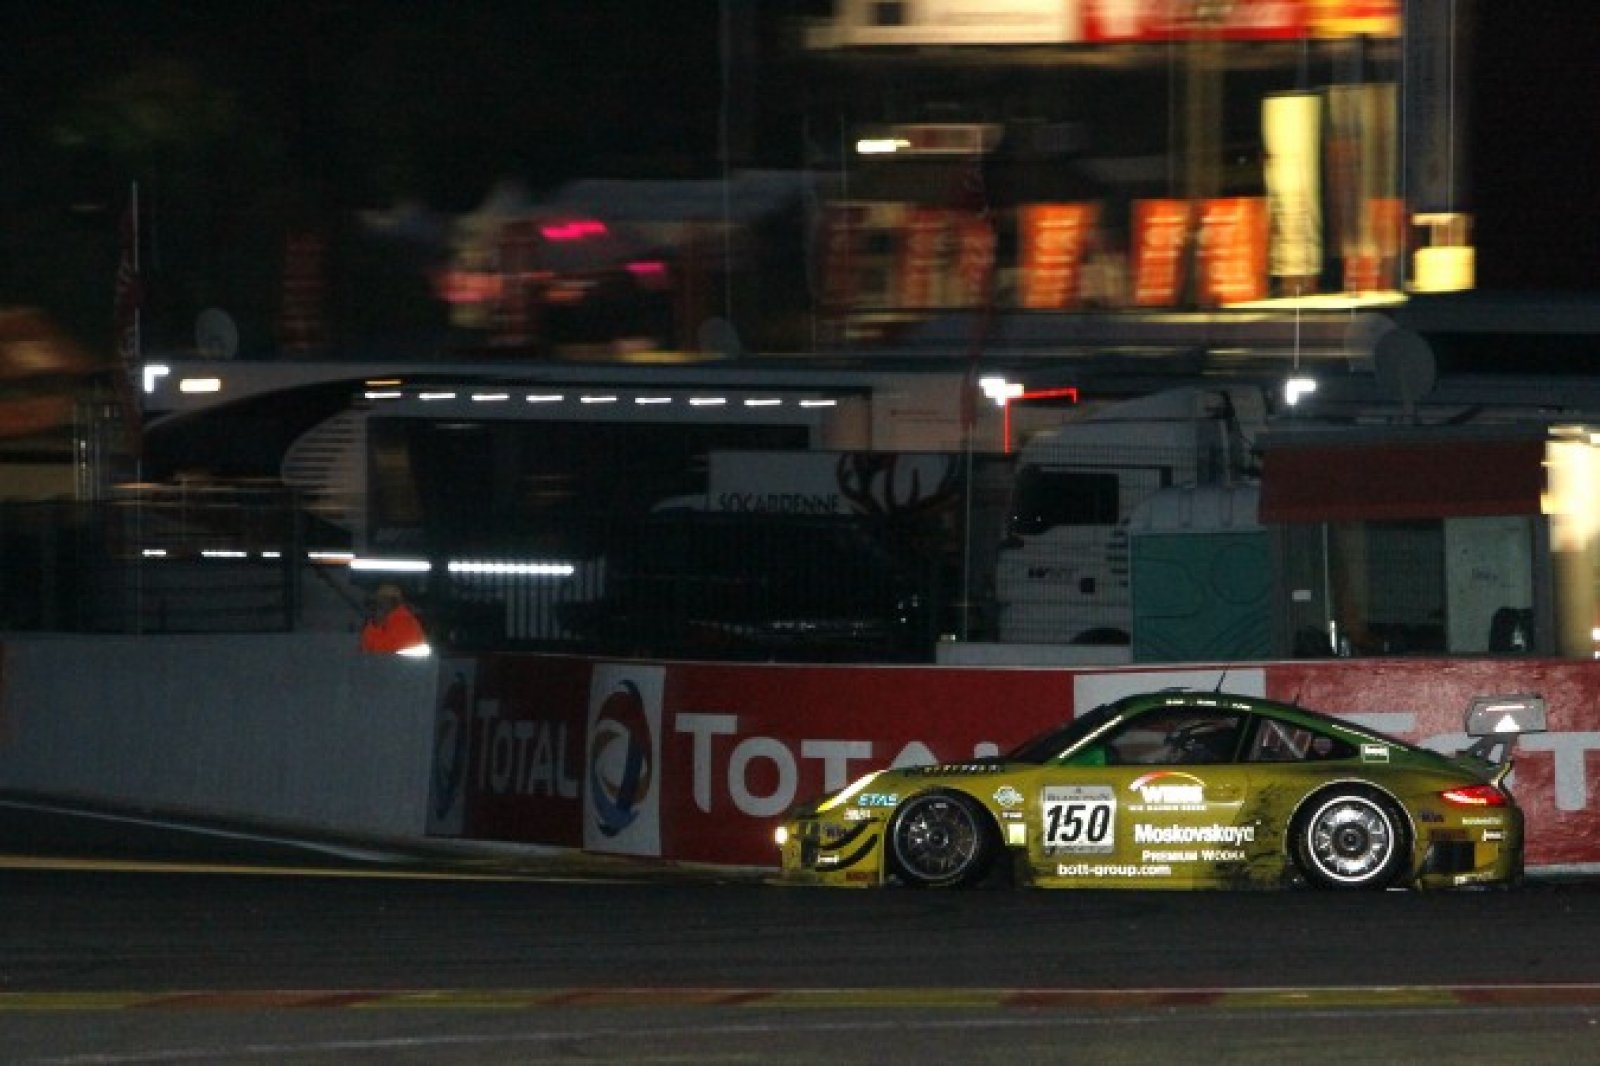 Manthey Racing Porsche leading, while Marc VDS Racing BMW throw in the towel